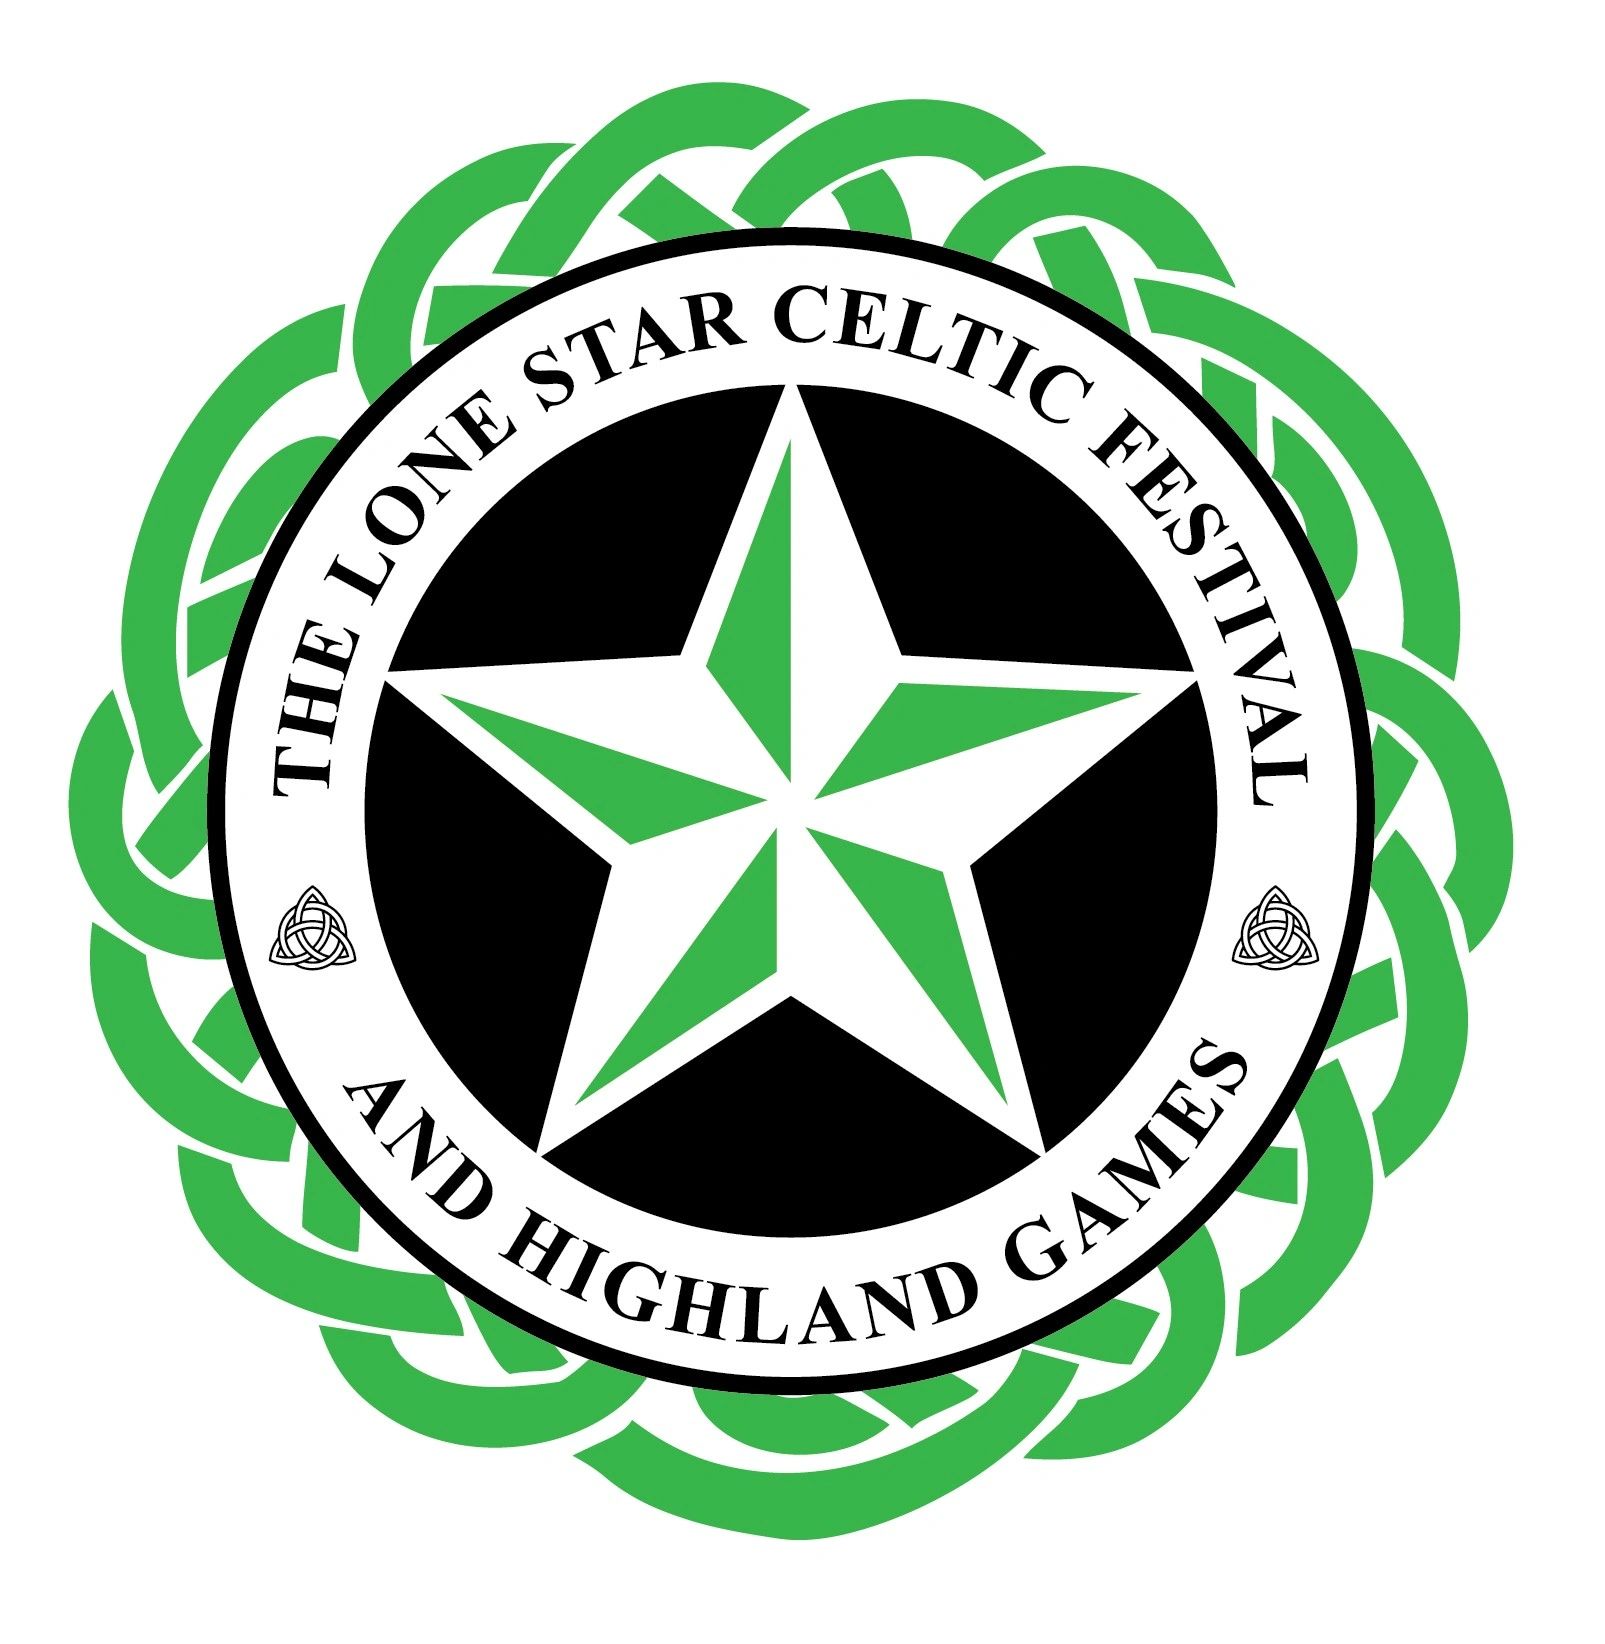 Lone Star Celtic Festival and Highland Games